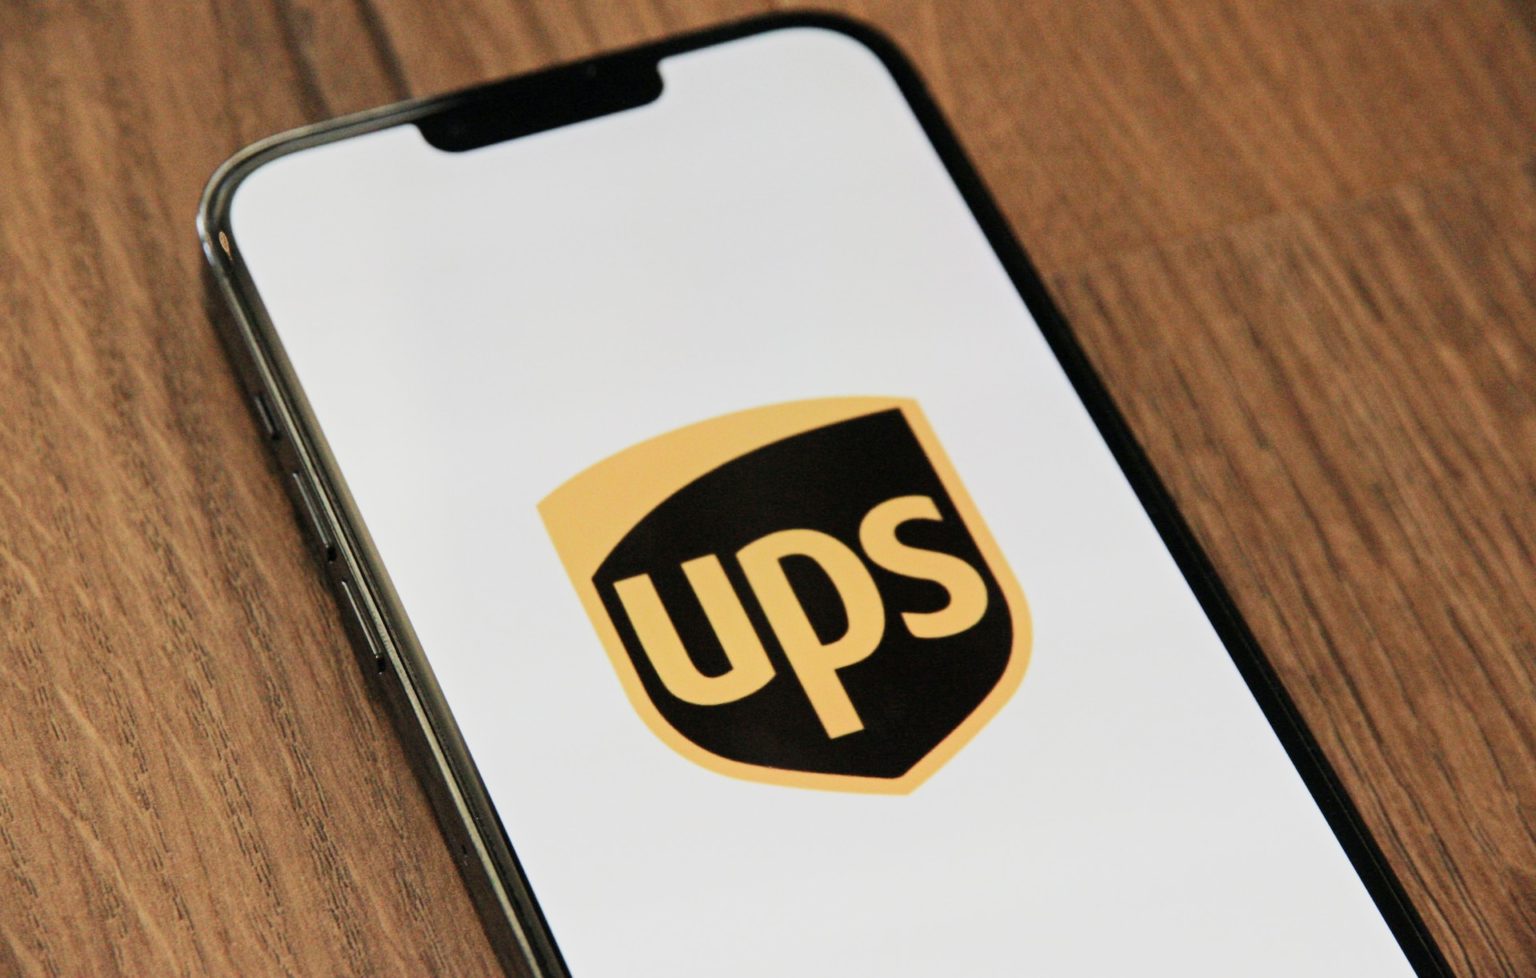 united parcel service tracking packages